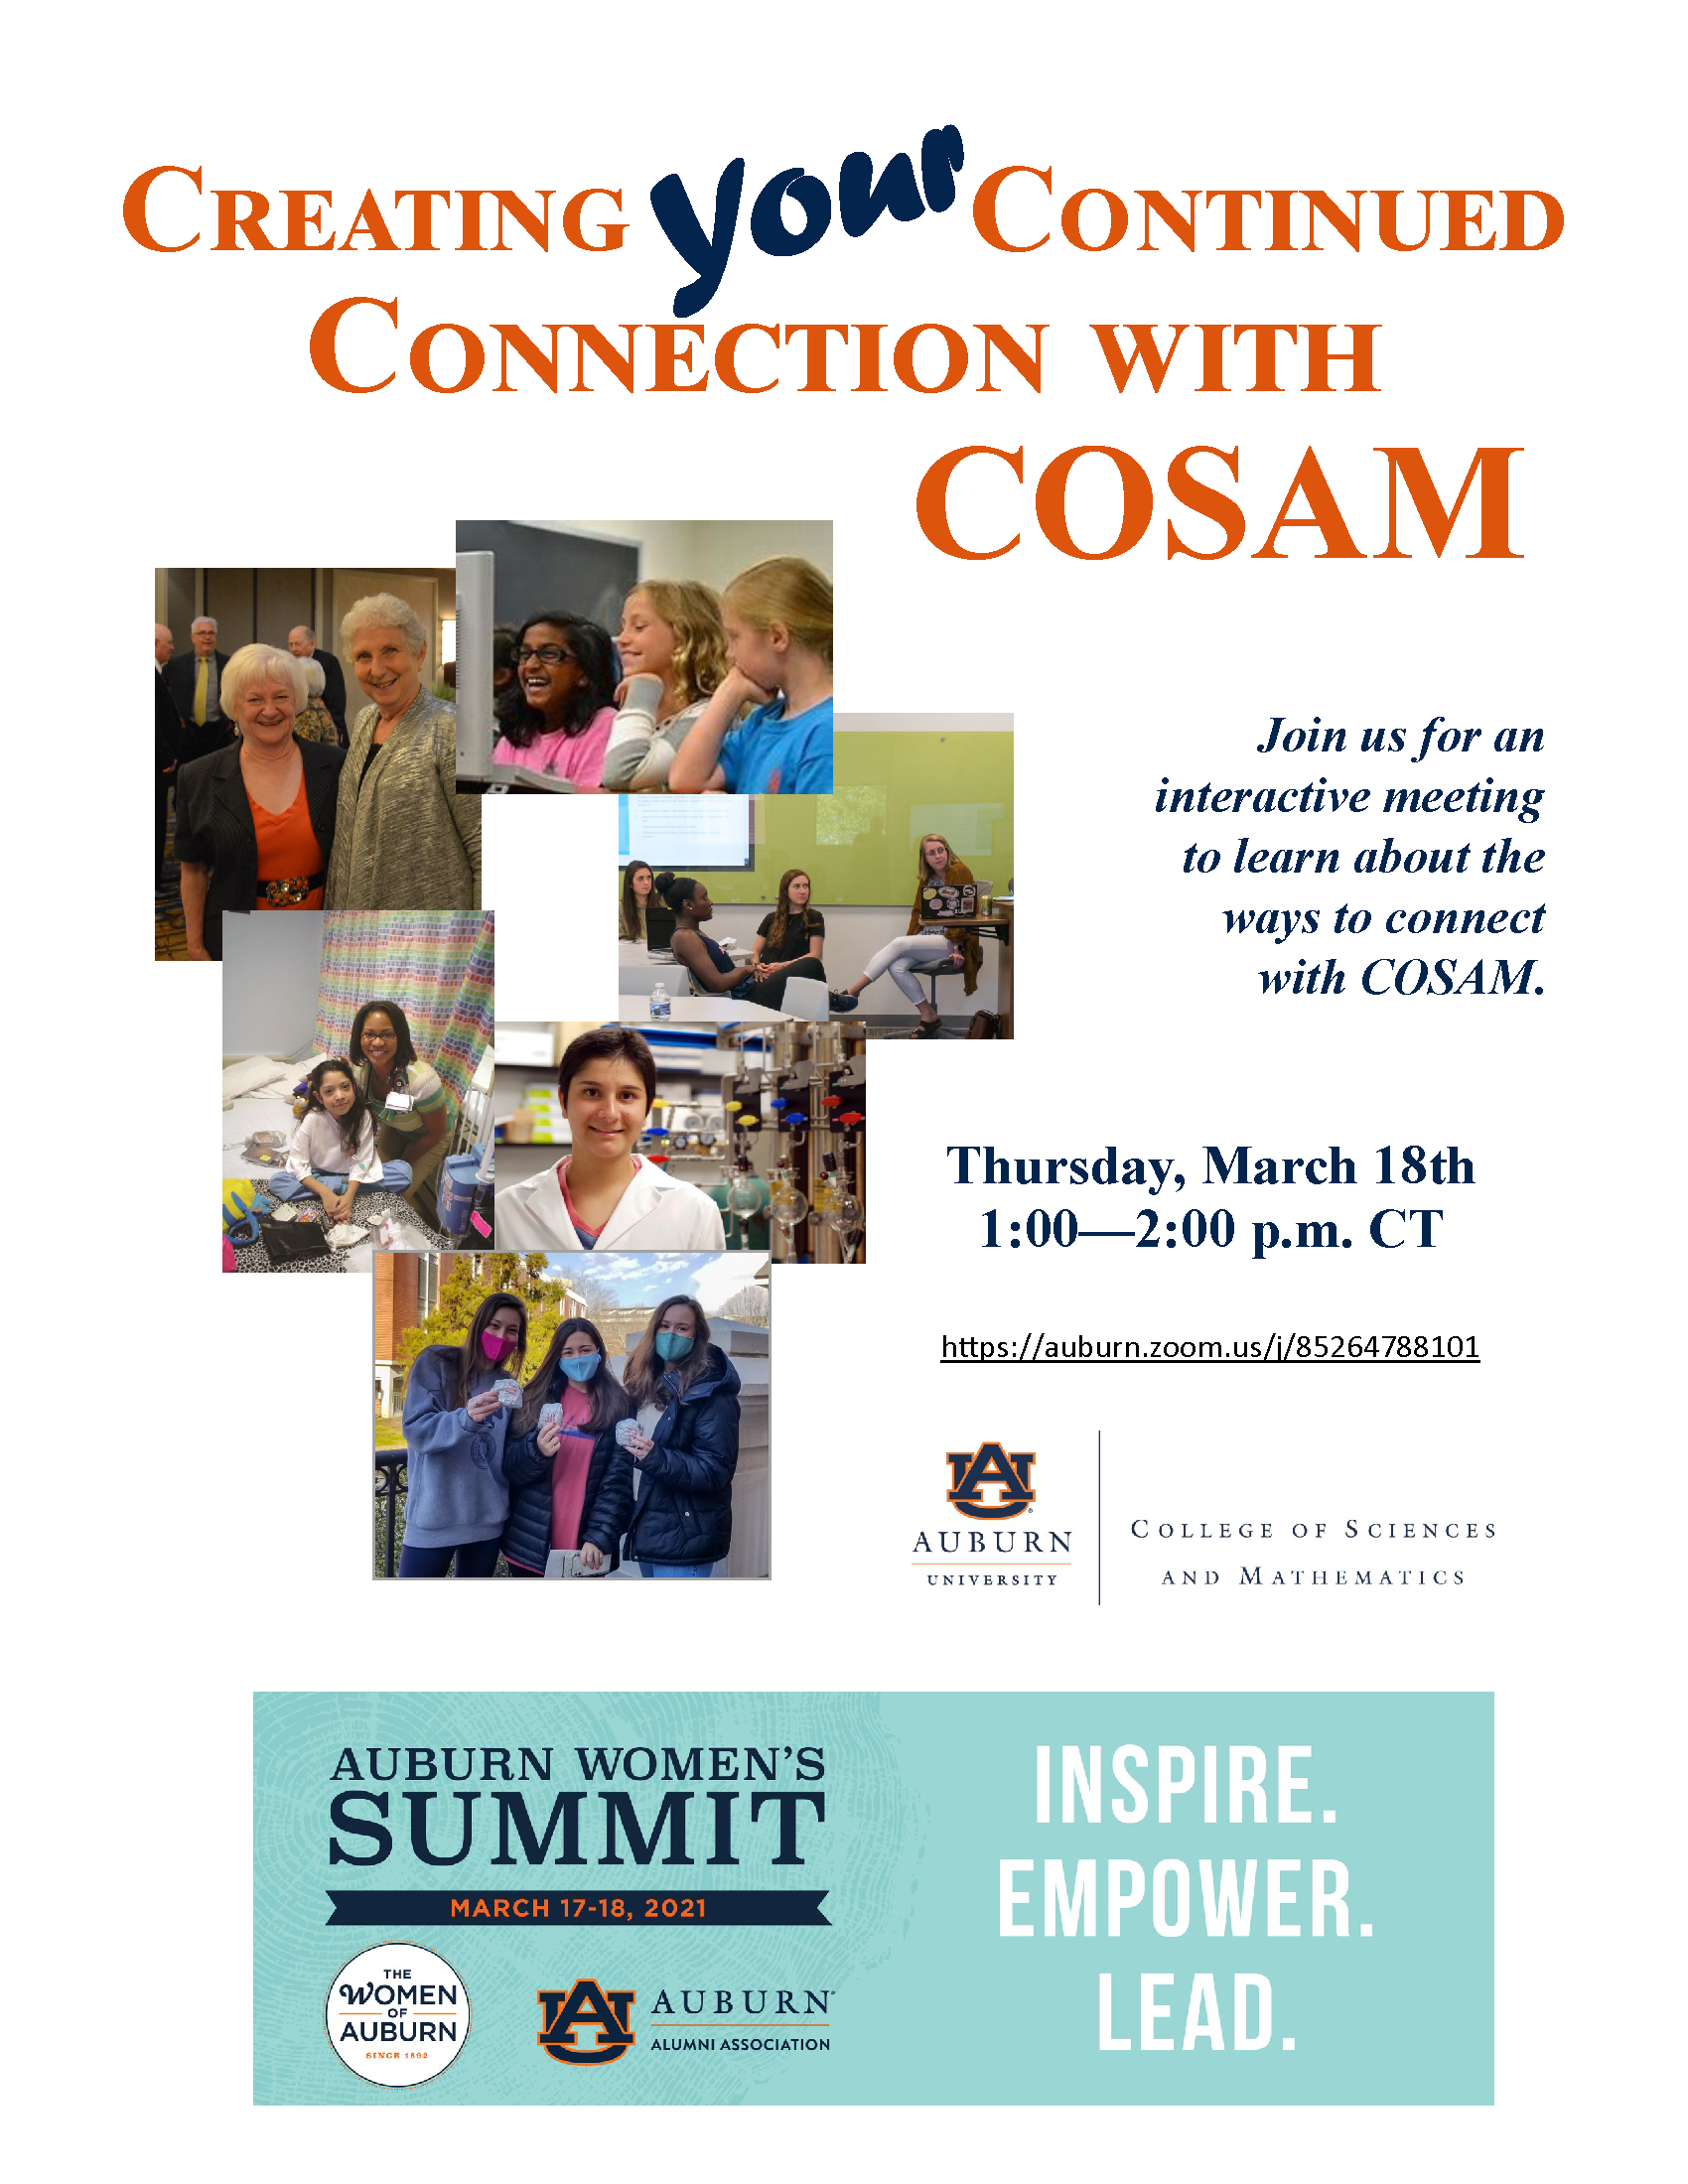 Creating your continued connection with COSAM